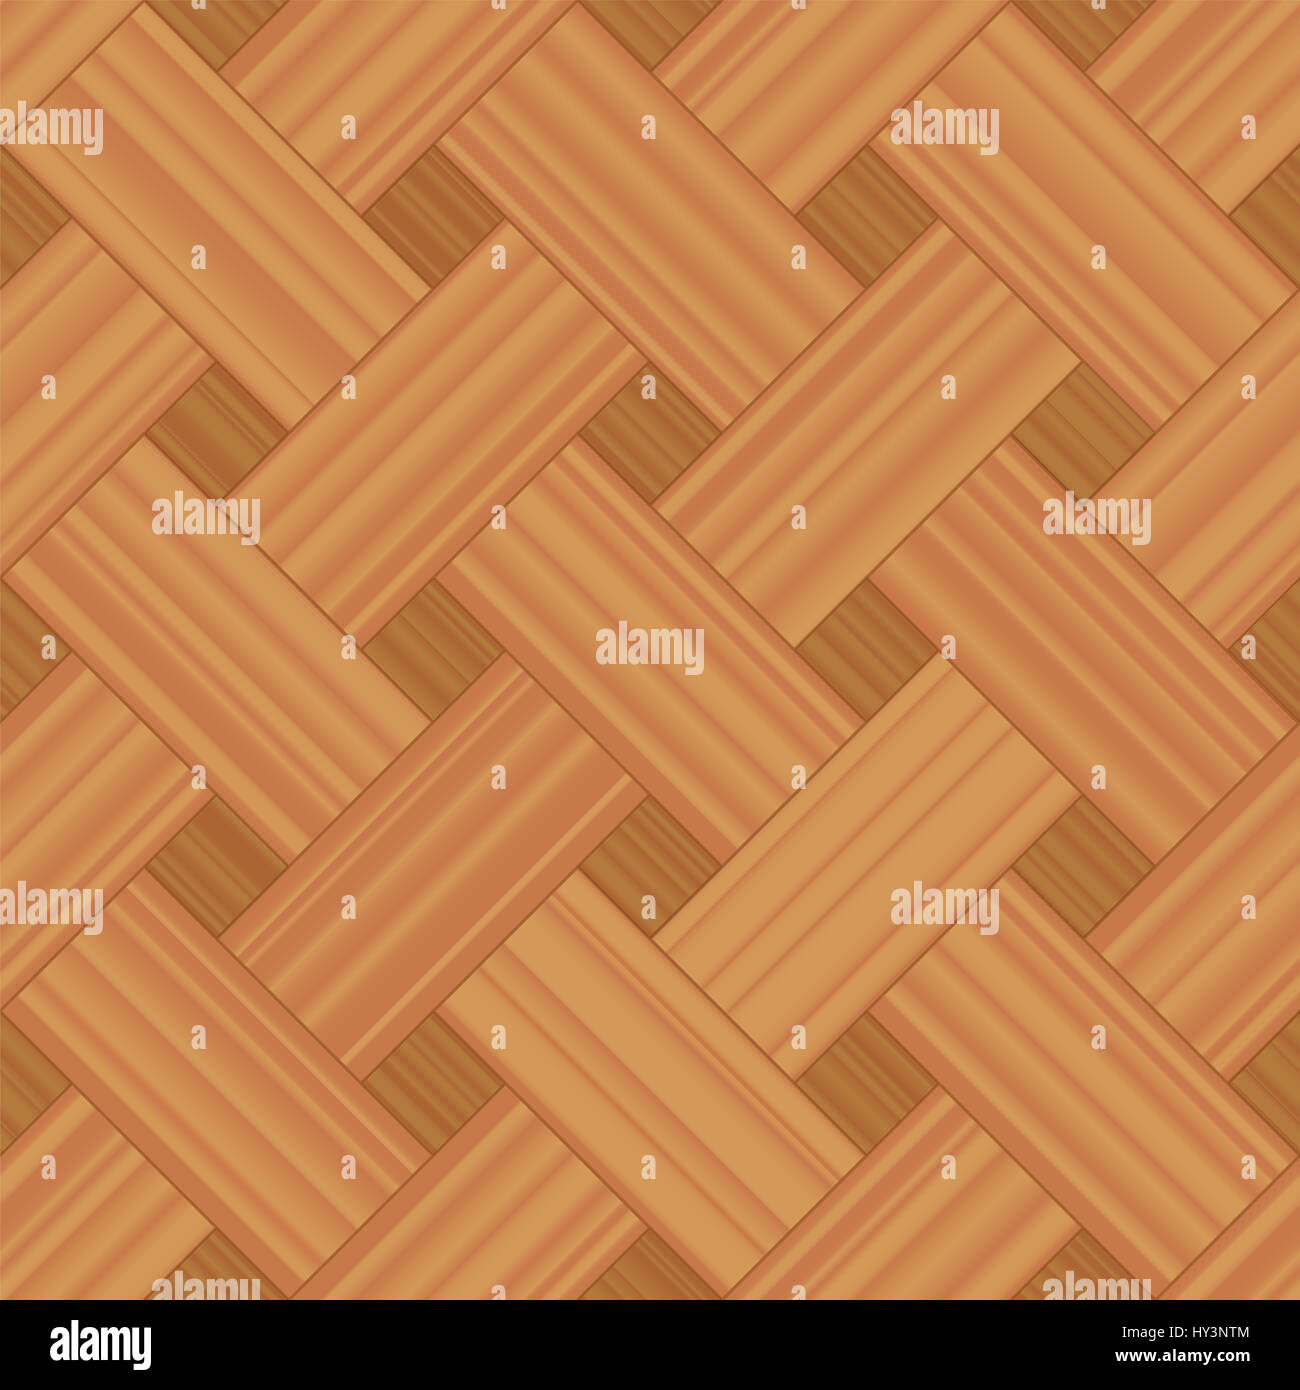 Basket Weave Parquet Pattern Illustration Of A Seamless